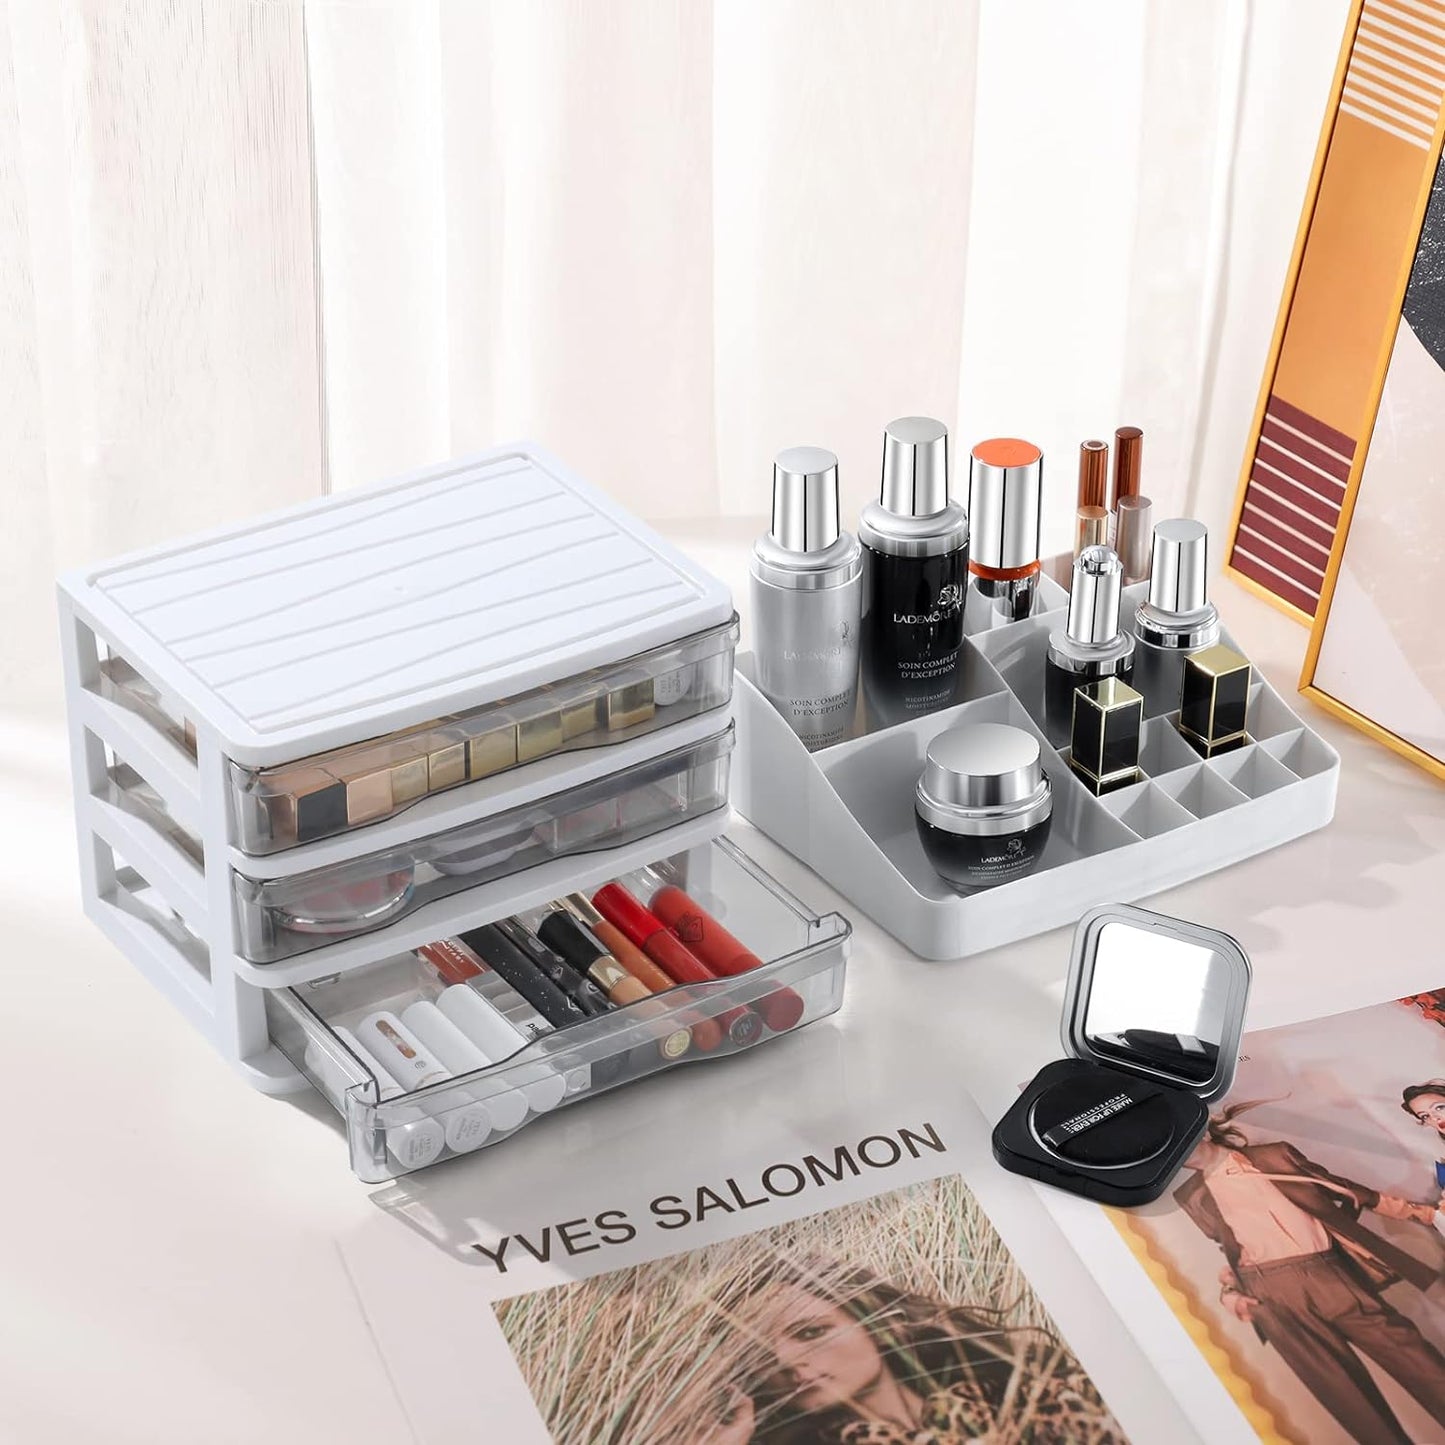 Cosmetics Makeup Organizer Storage: 9.6" Detach Make up Organizers and Storage with Clear Drawers Large Skincare Organizers for Vanity Countertop Dresser Bedroom Bathroom Desk